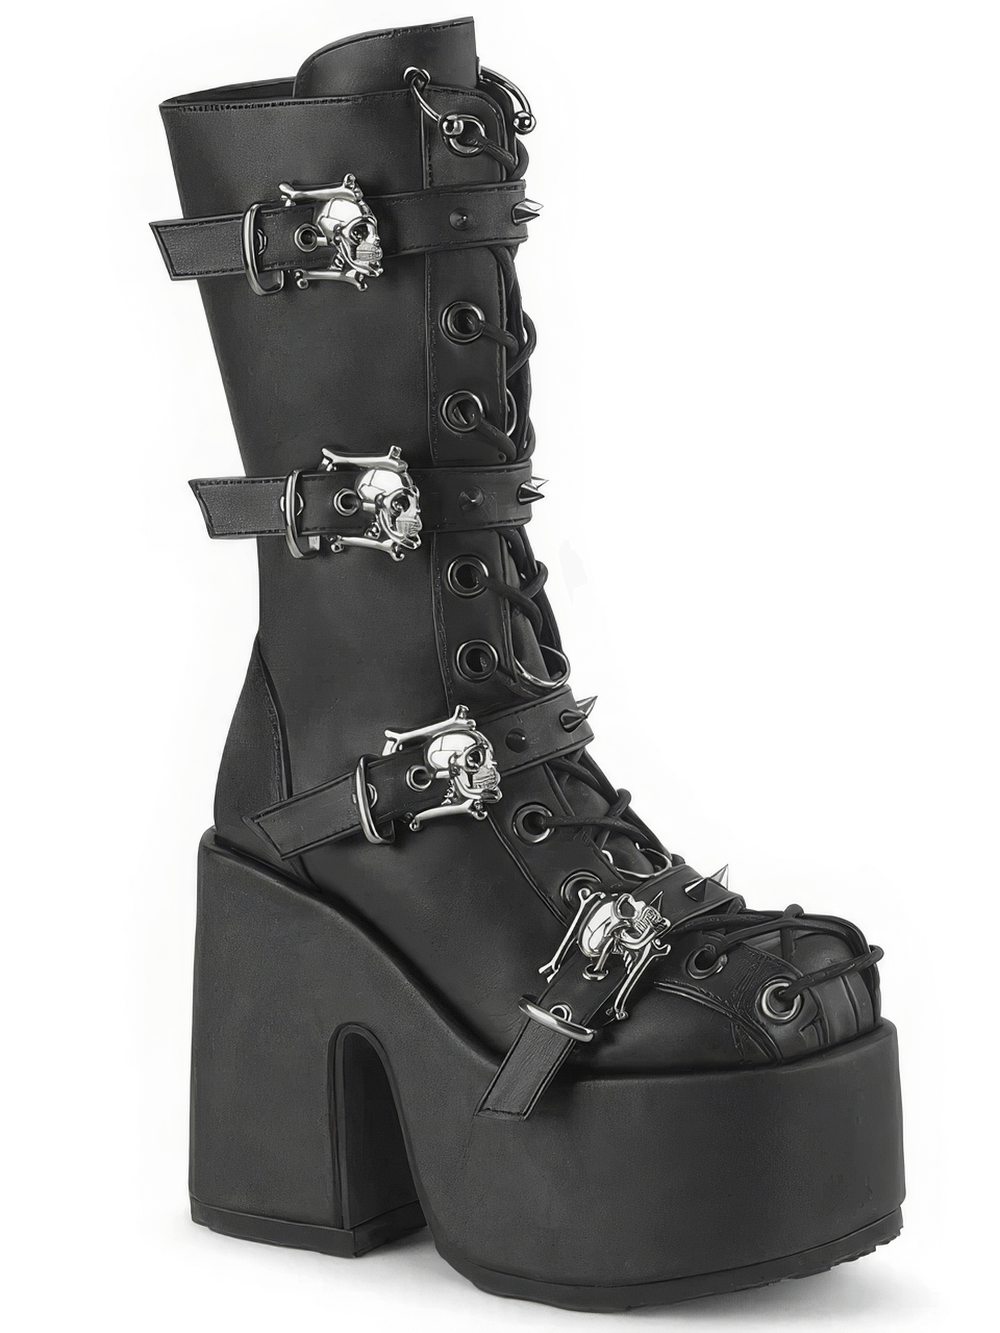 DEMONIA Edgy Mid-Calf Boots with Spikes and Skull Details